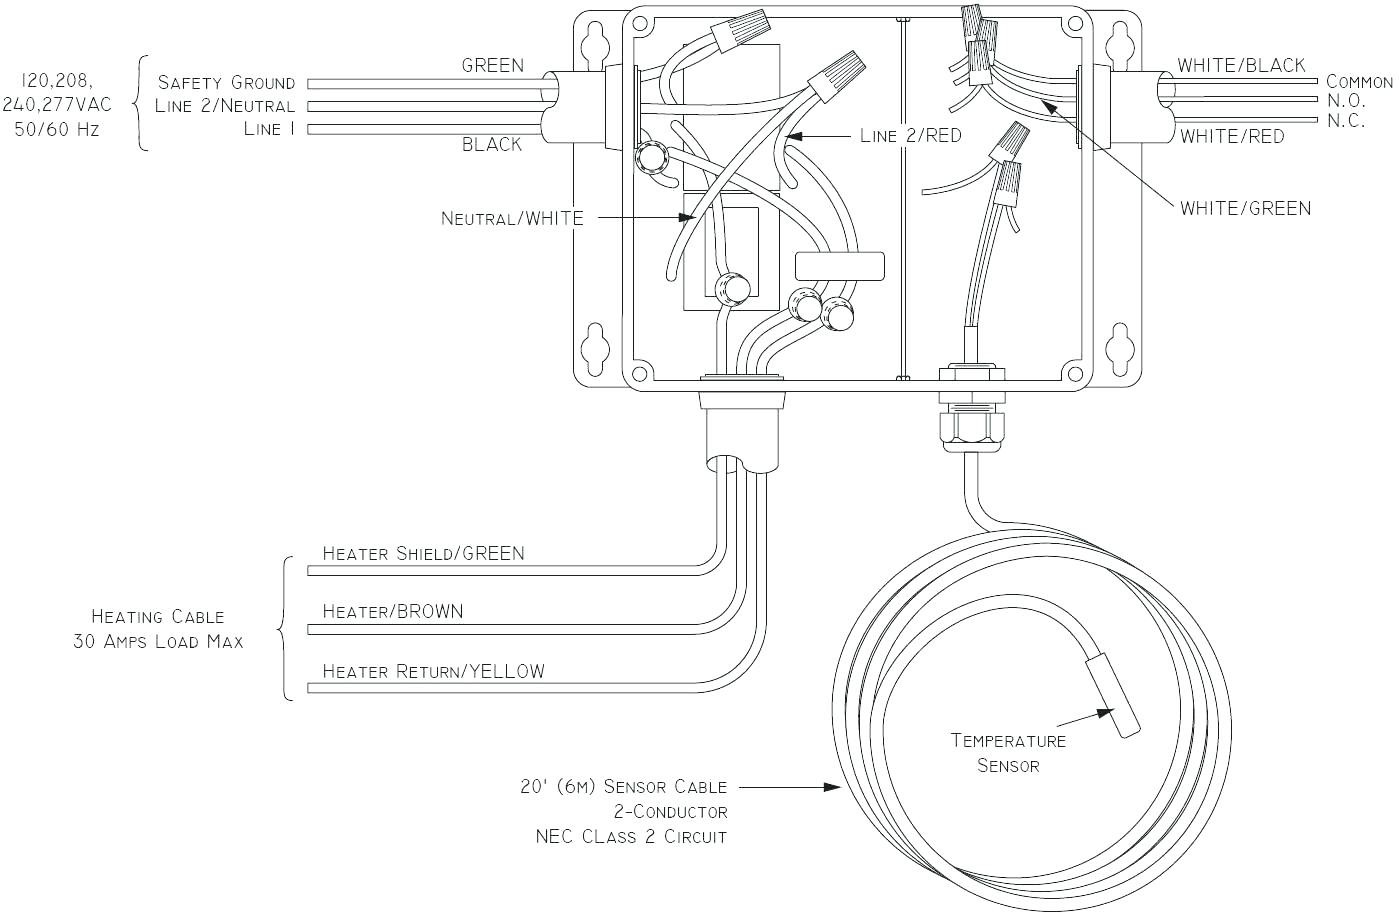 Full Size of Nest Thermostat 3rd Generation Wiring Diagram Boiler Baseboard Heater The Wire Full Image